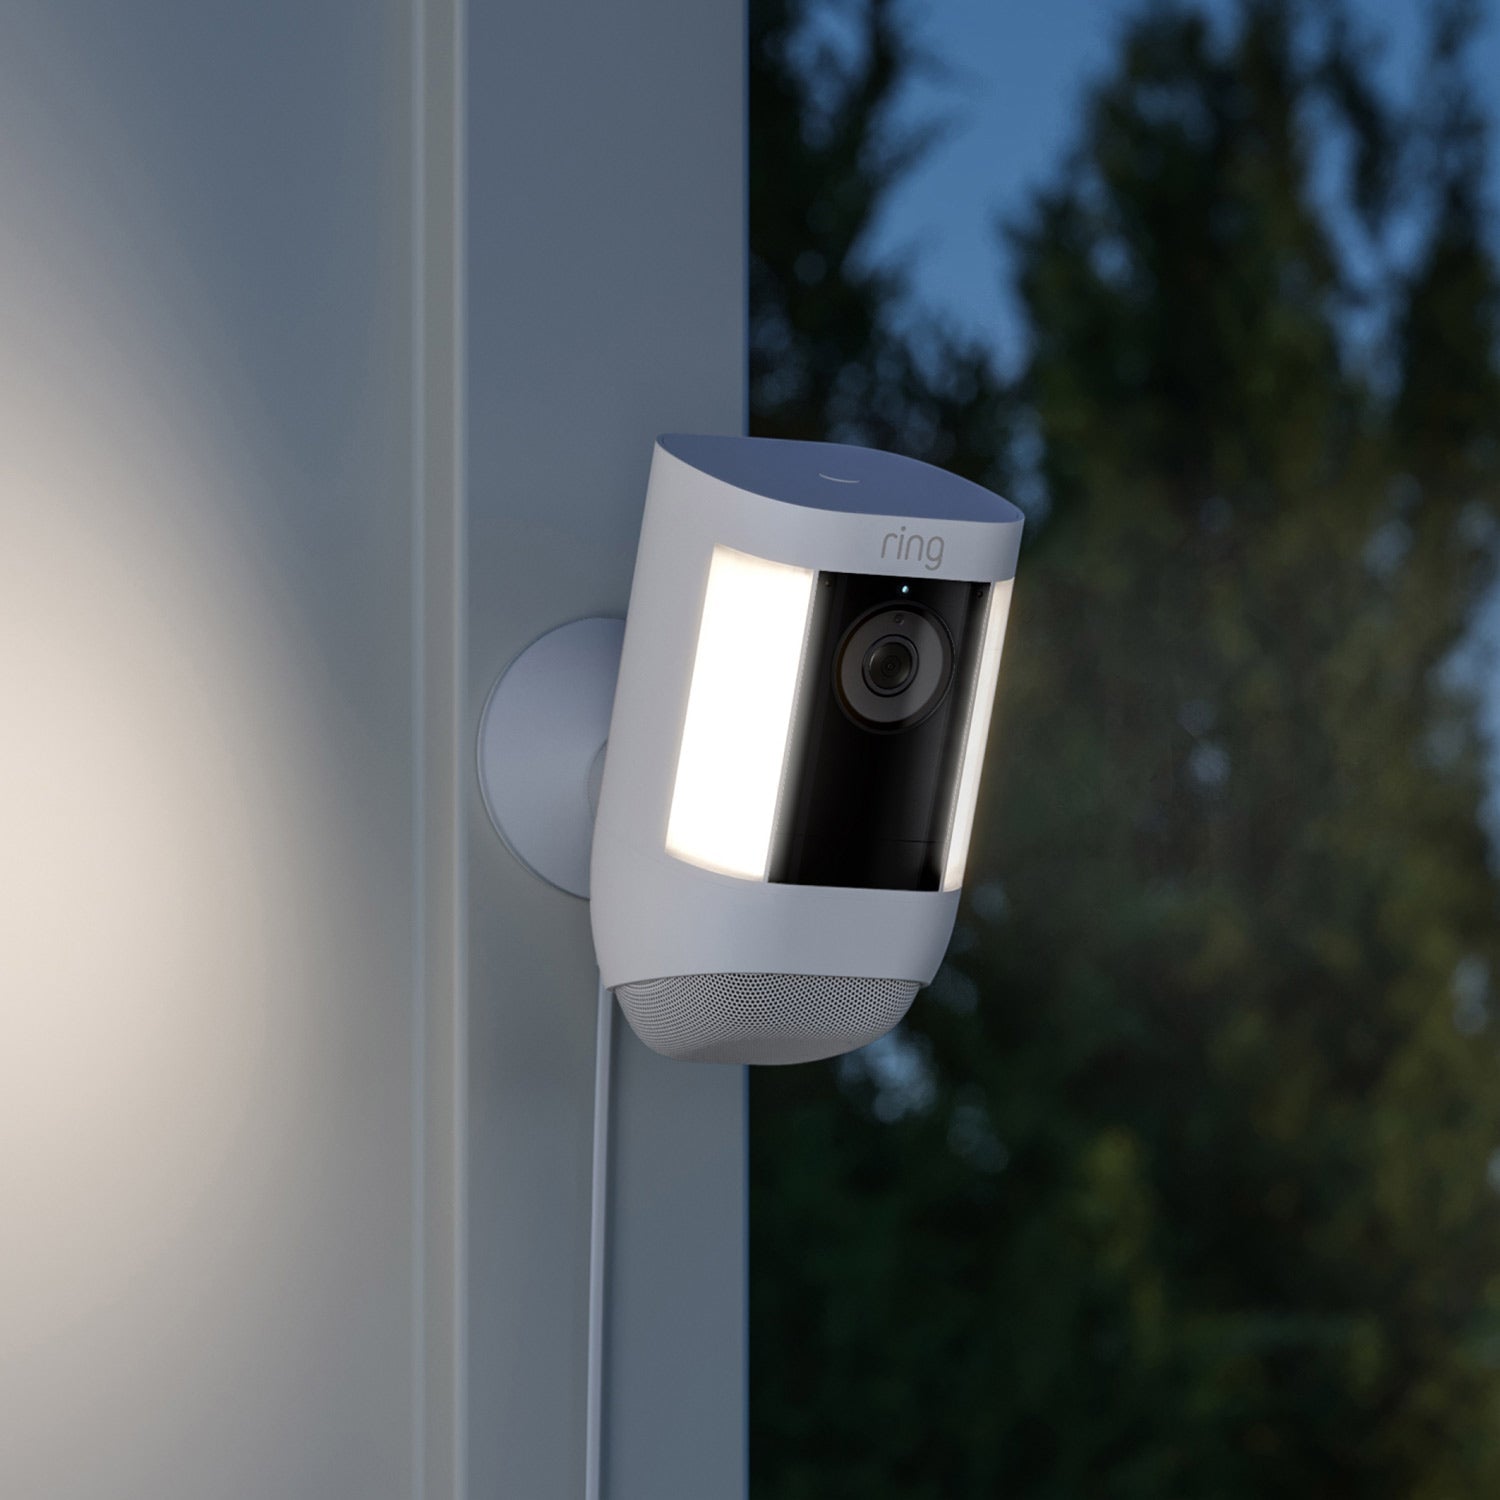 Spotlight Cam Pro (Plug-In) - Spotlight Cam Pro, Plug-In model in white mounted on exterior corner of home with both lights illuminated.